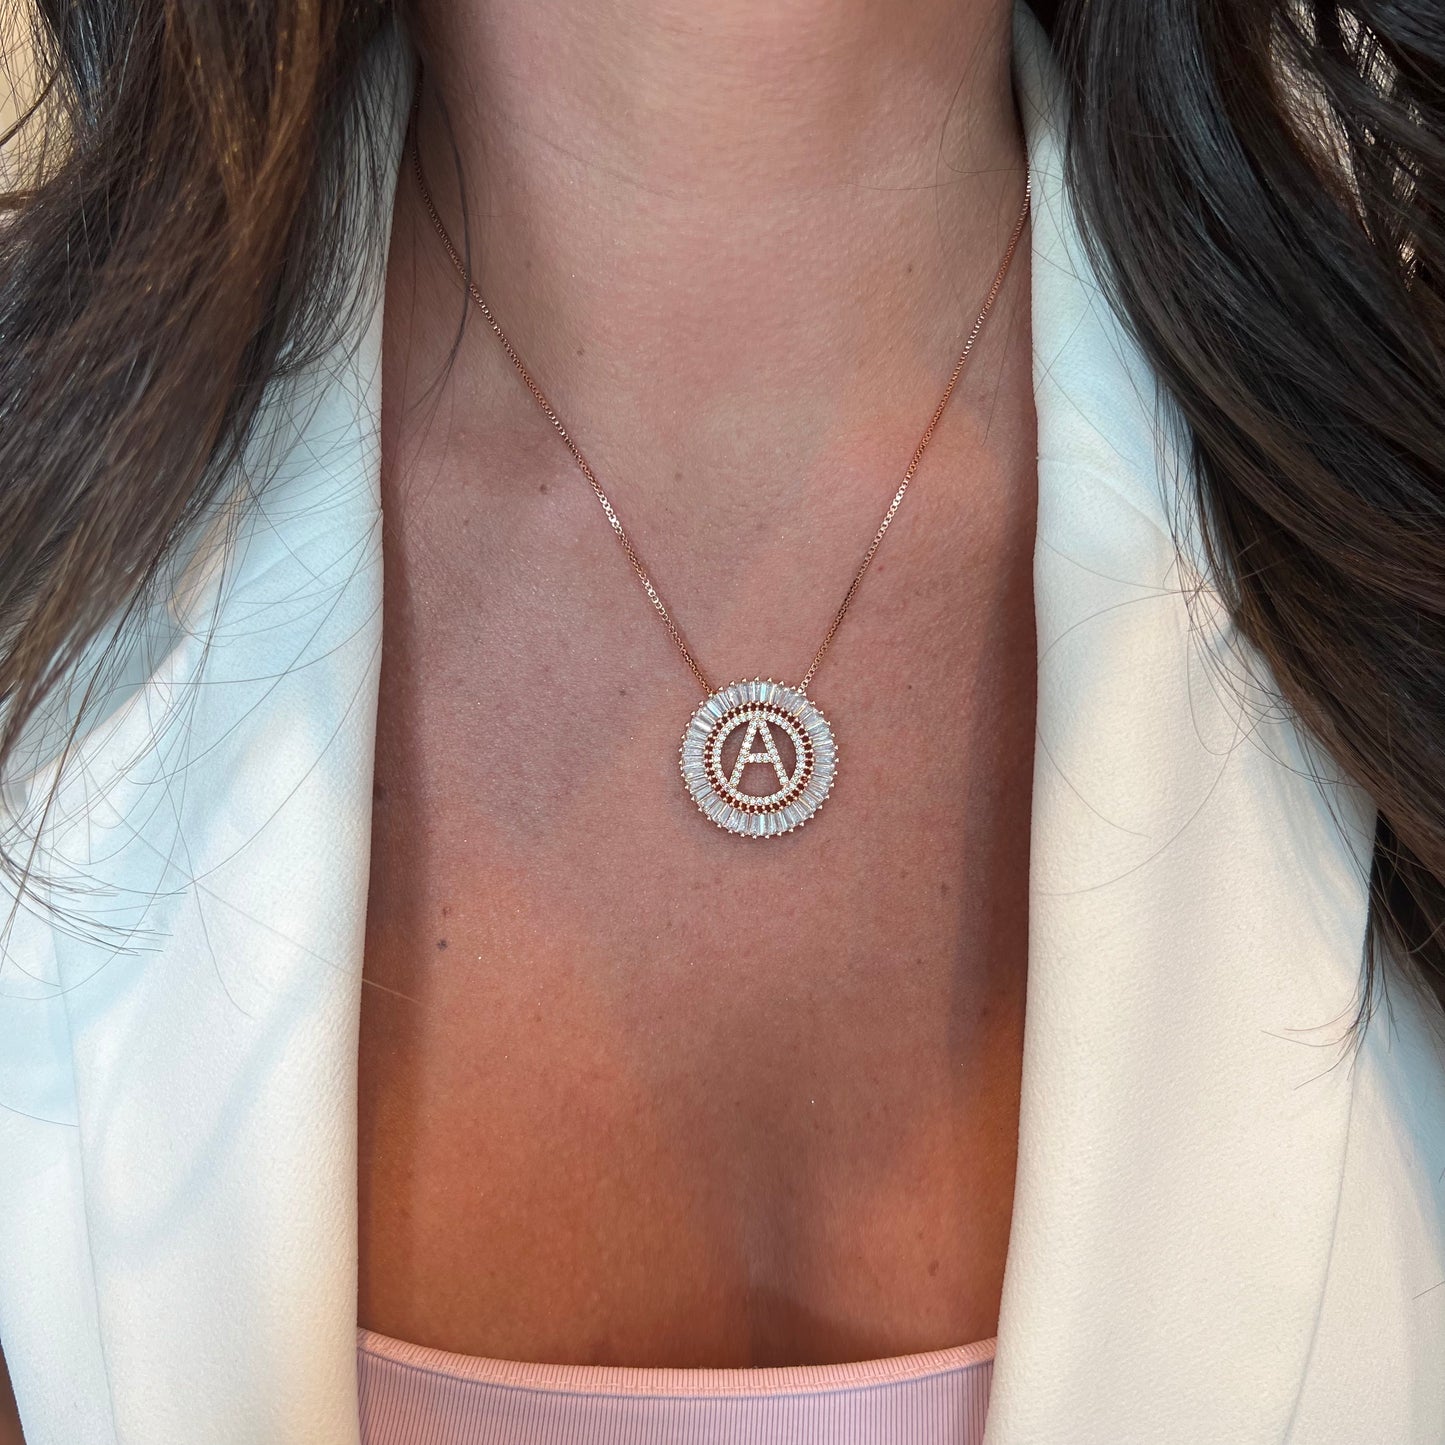 New Mandala Letter Necklace A - Z | ROSE GOLD PLATED